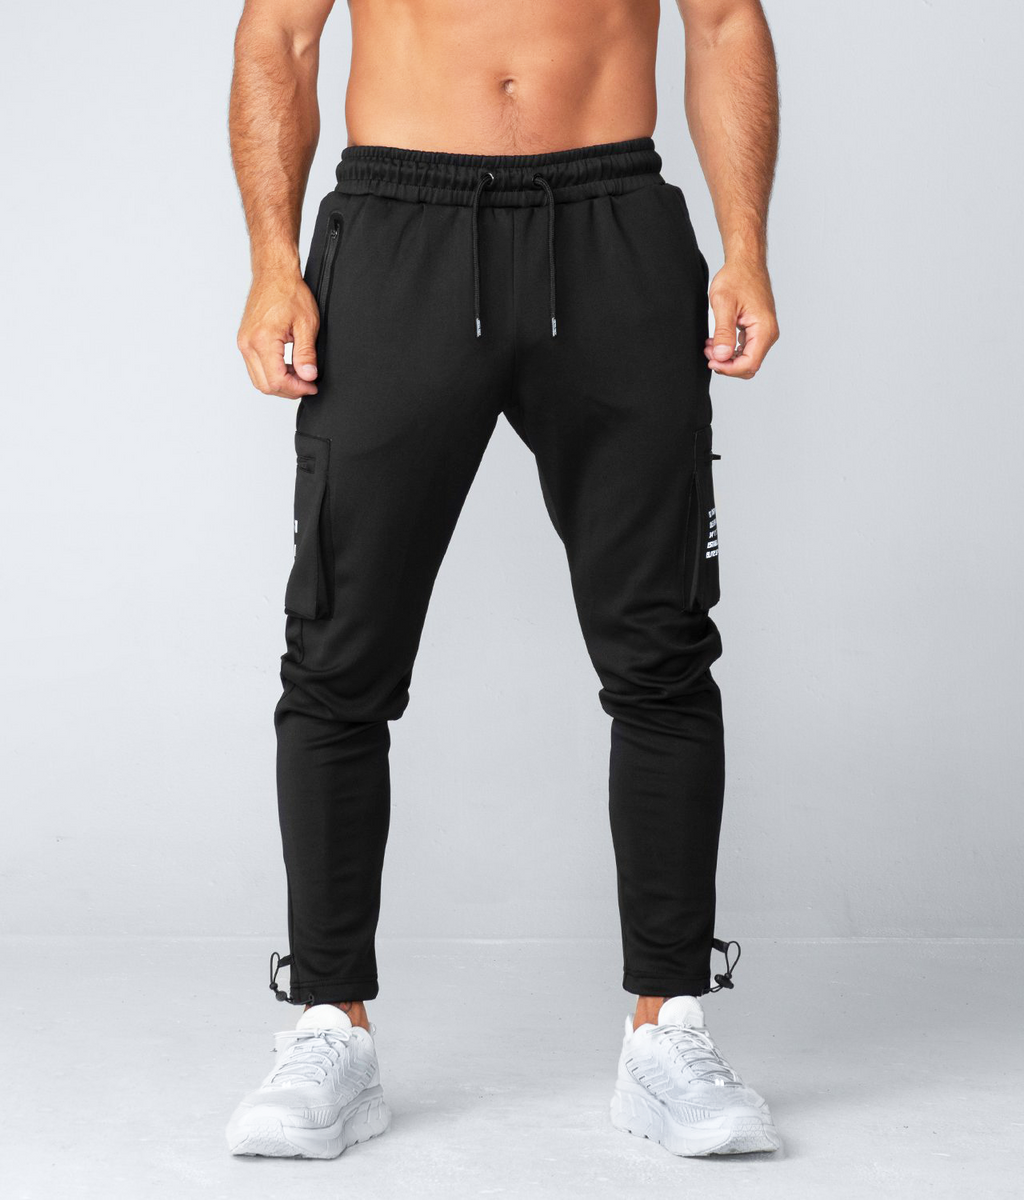 Born Tough Momentum Fitted Cargo Gym Workout Jogger Pants for Men Black